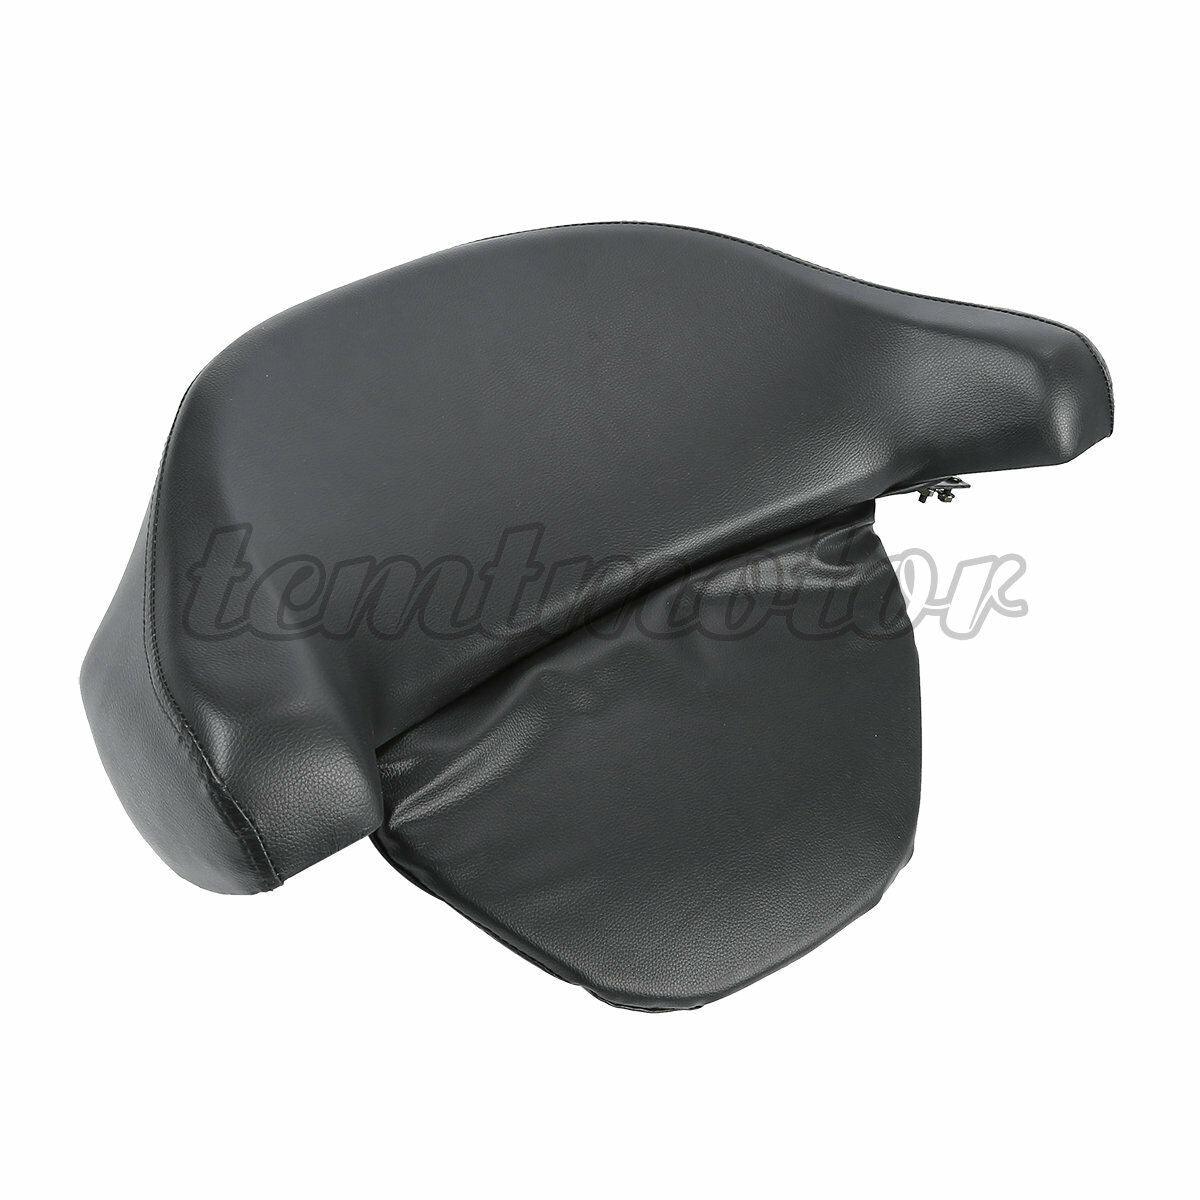 Black Tour Pack Backrest Pad Trunk For Harley Pak Electra Street Glide 1997-2013 - Moto Life Products